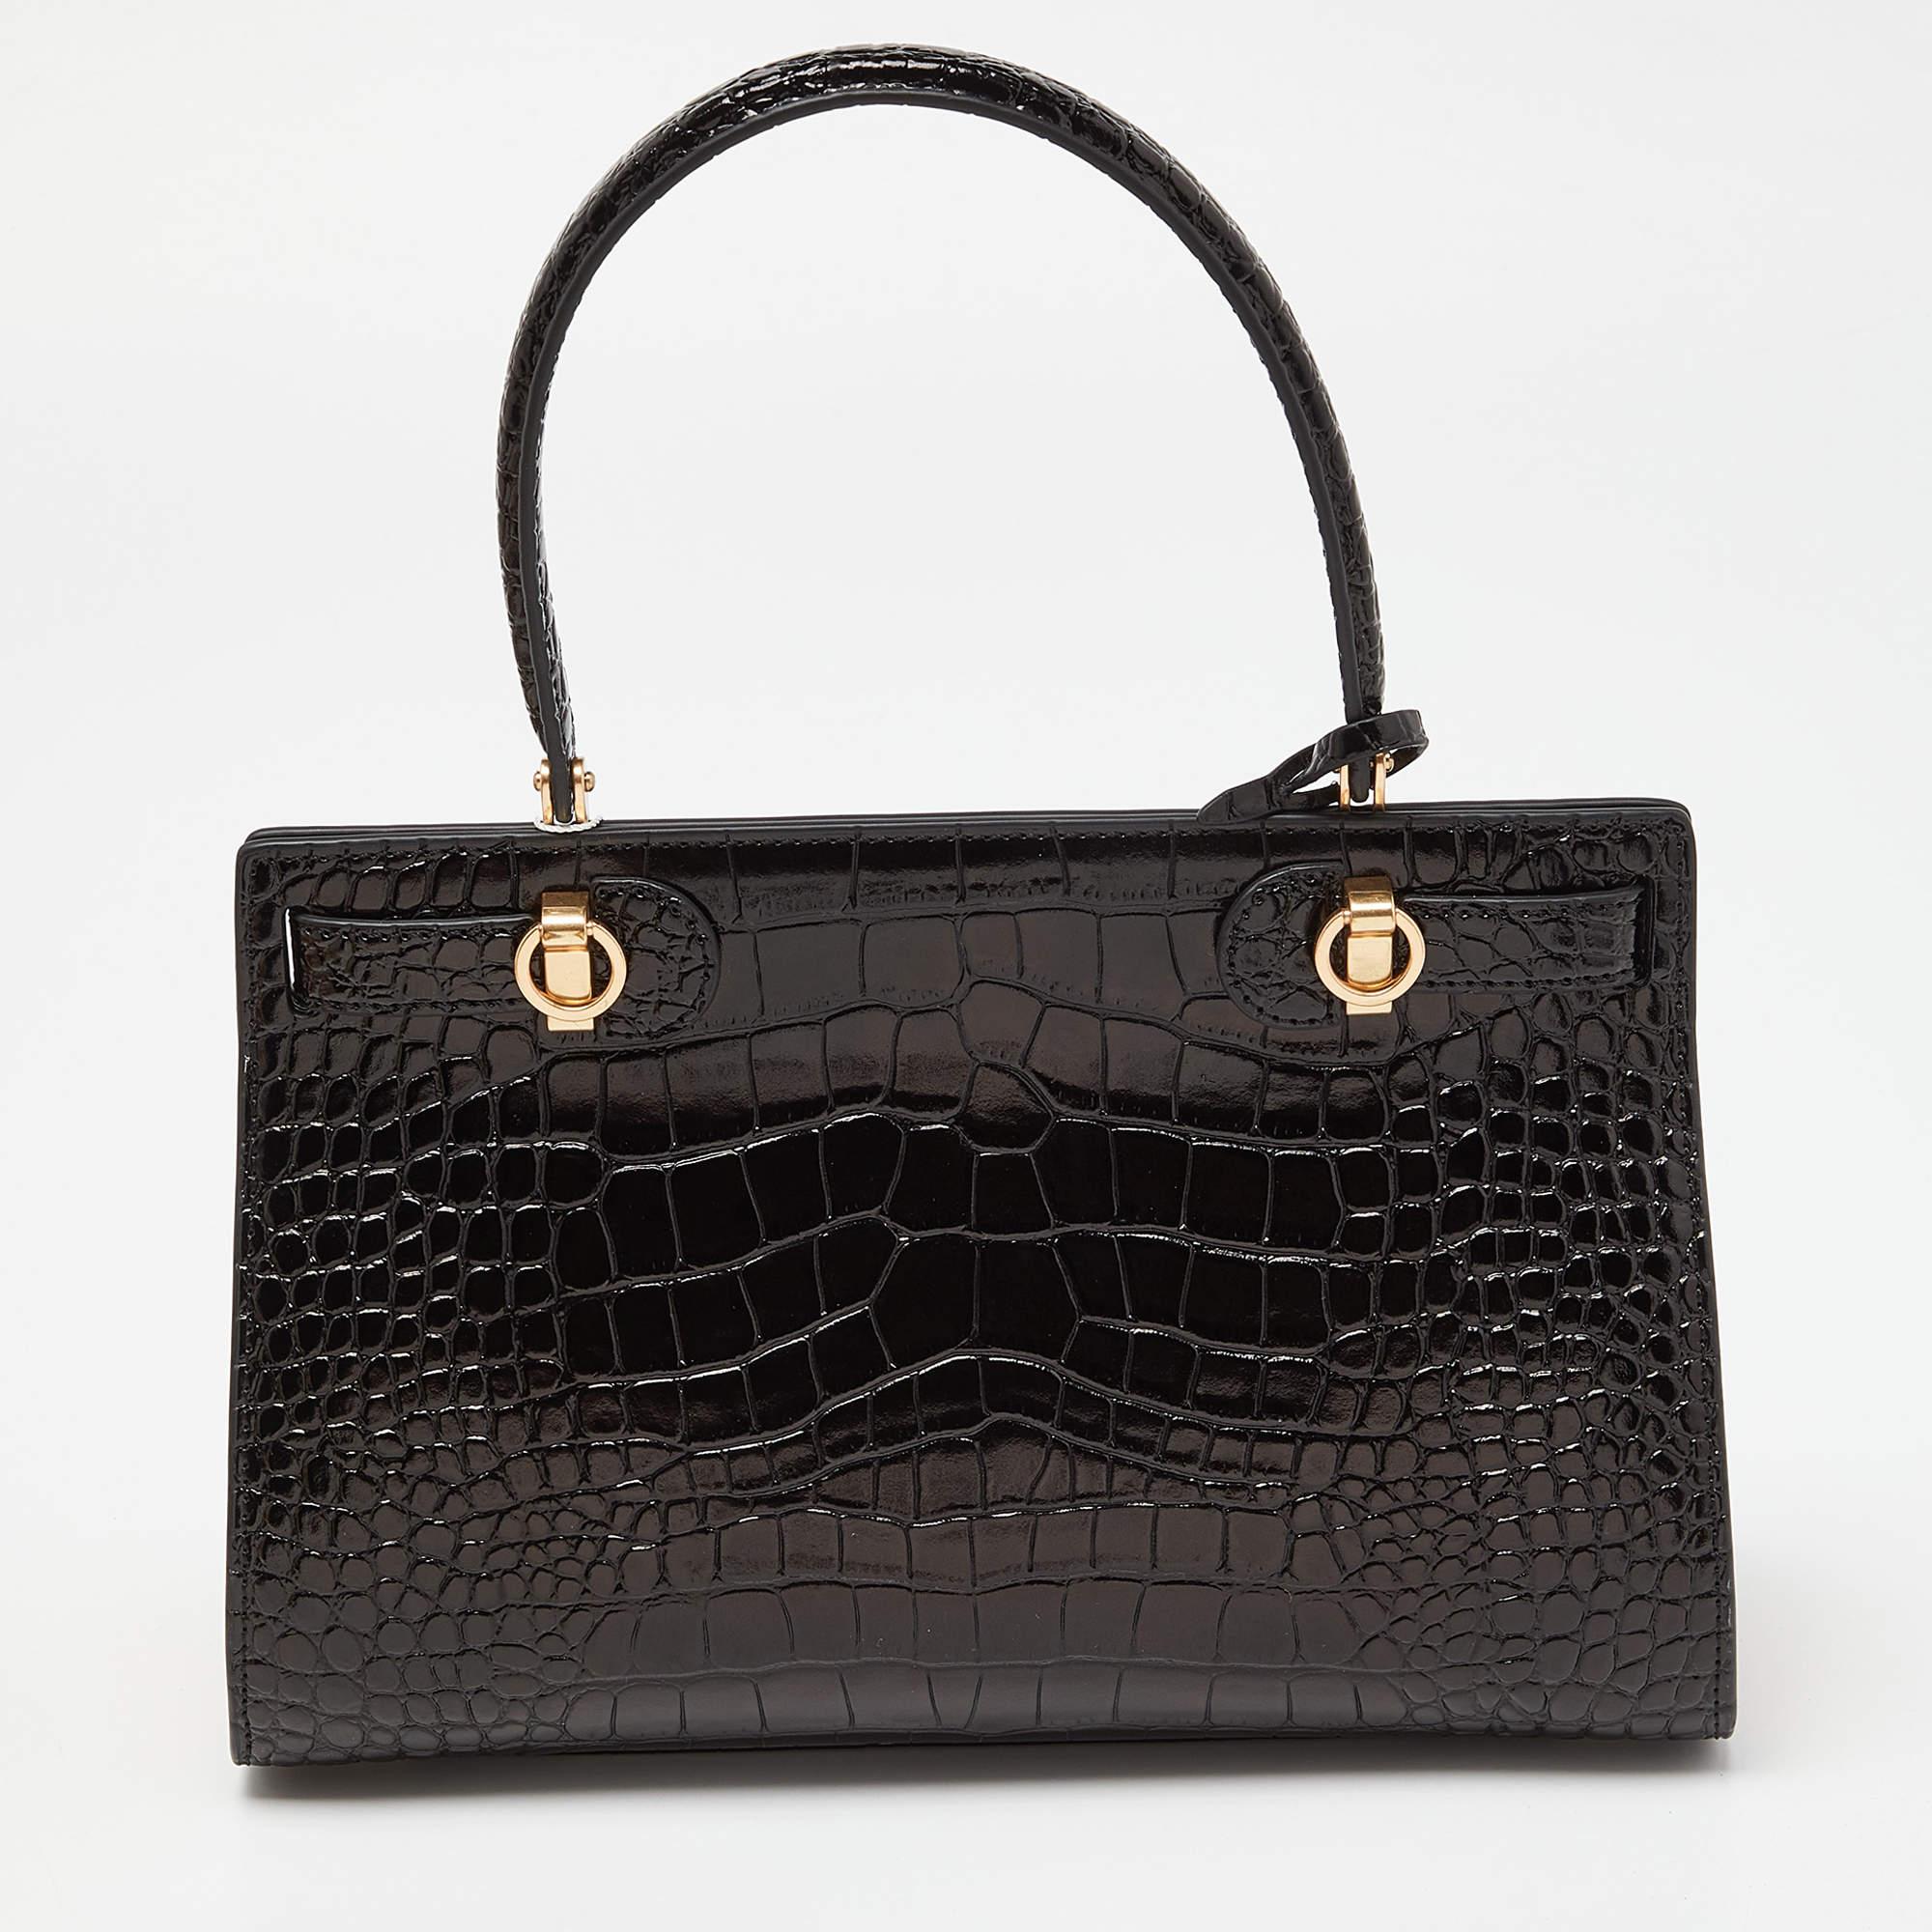 Functional and stylish, Tory Burch's collections capture the effortless, elegant finesse of the modern woman. Crafted from quality materials, this chic bag is easy to carry and can fit in your daily essentials effortlessly.

Includes: Original